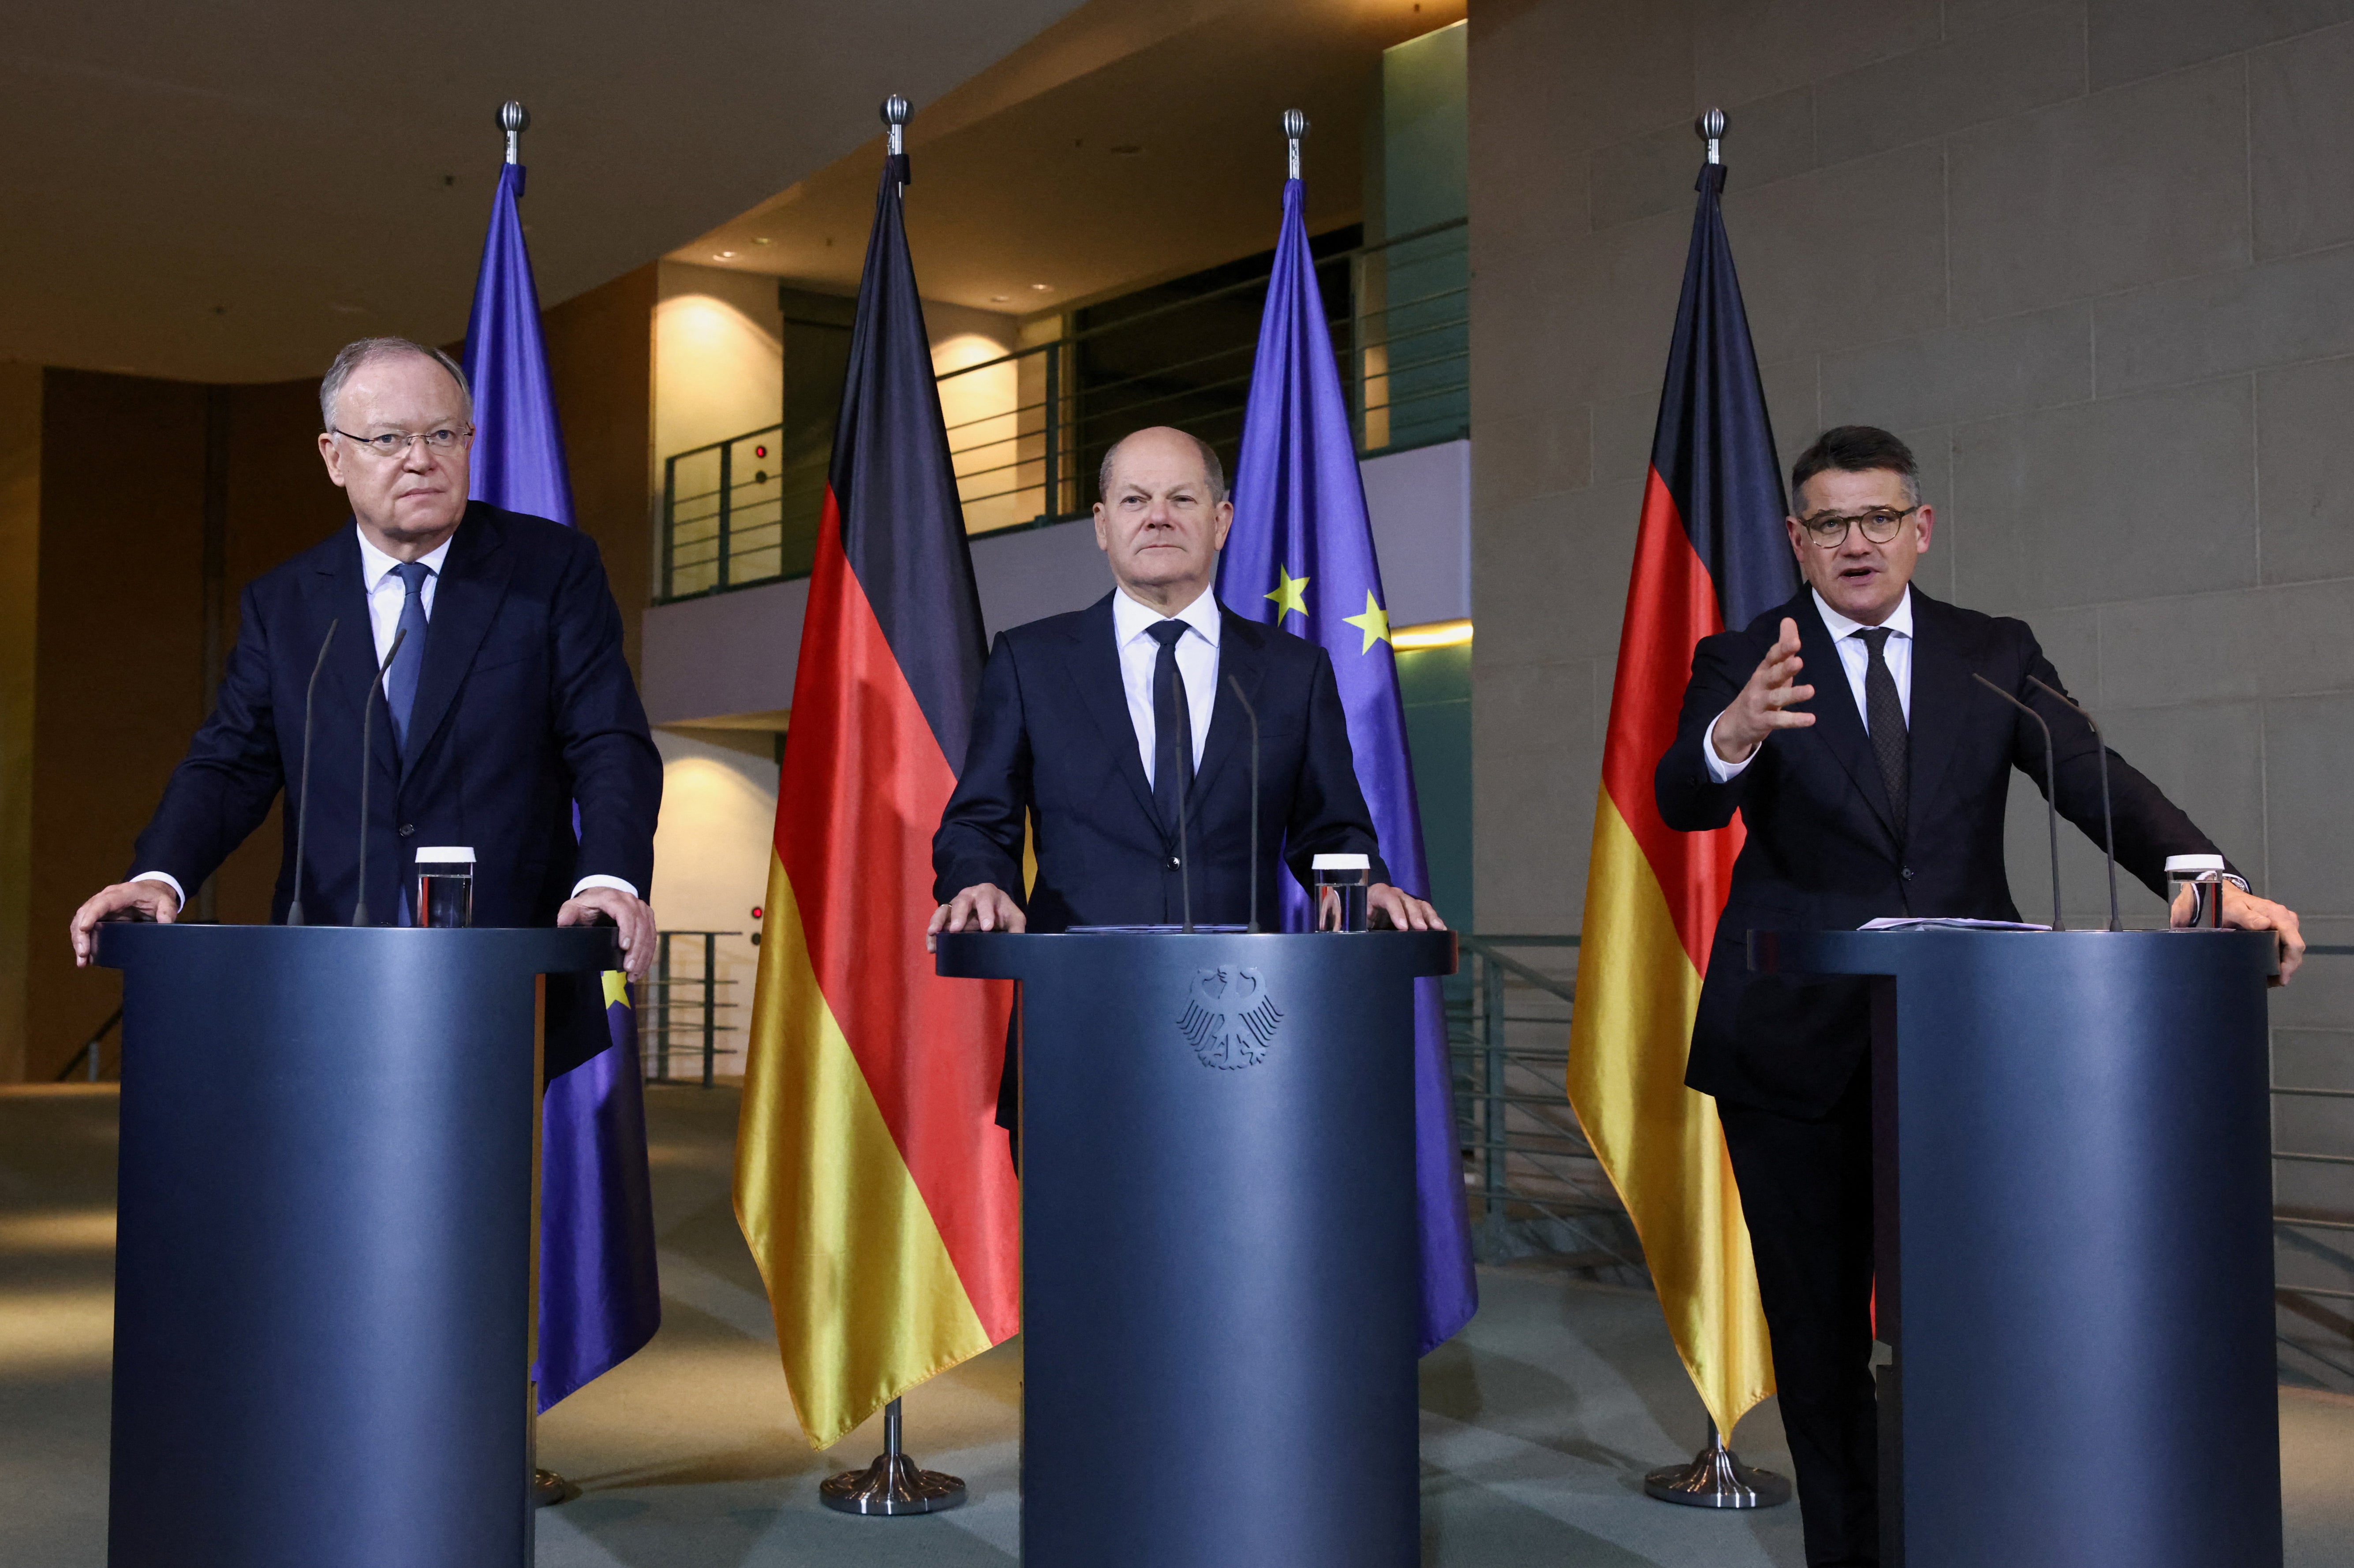 Chancellor Olaf Scholz, centre, with leaders of German states